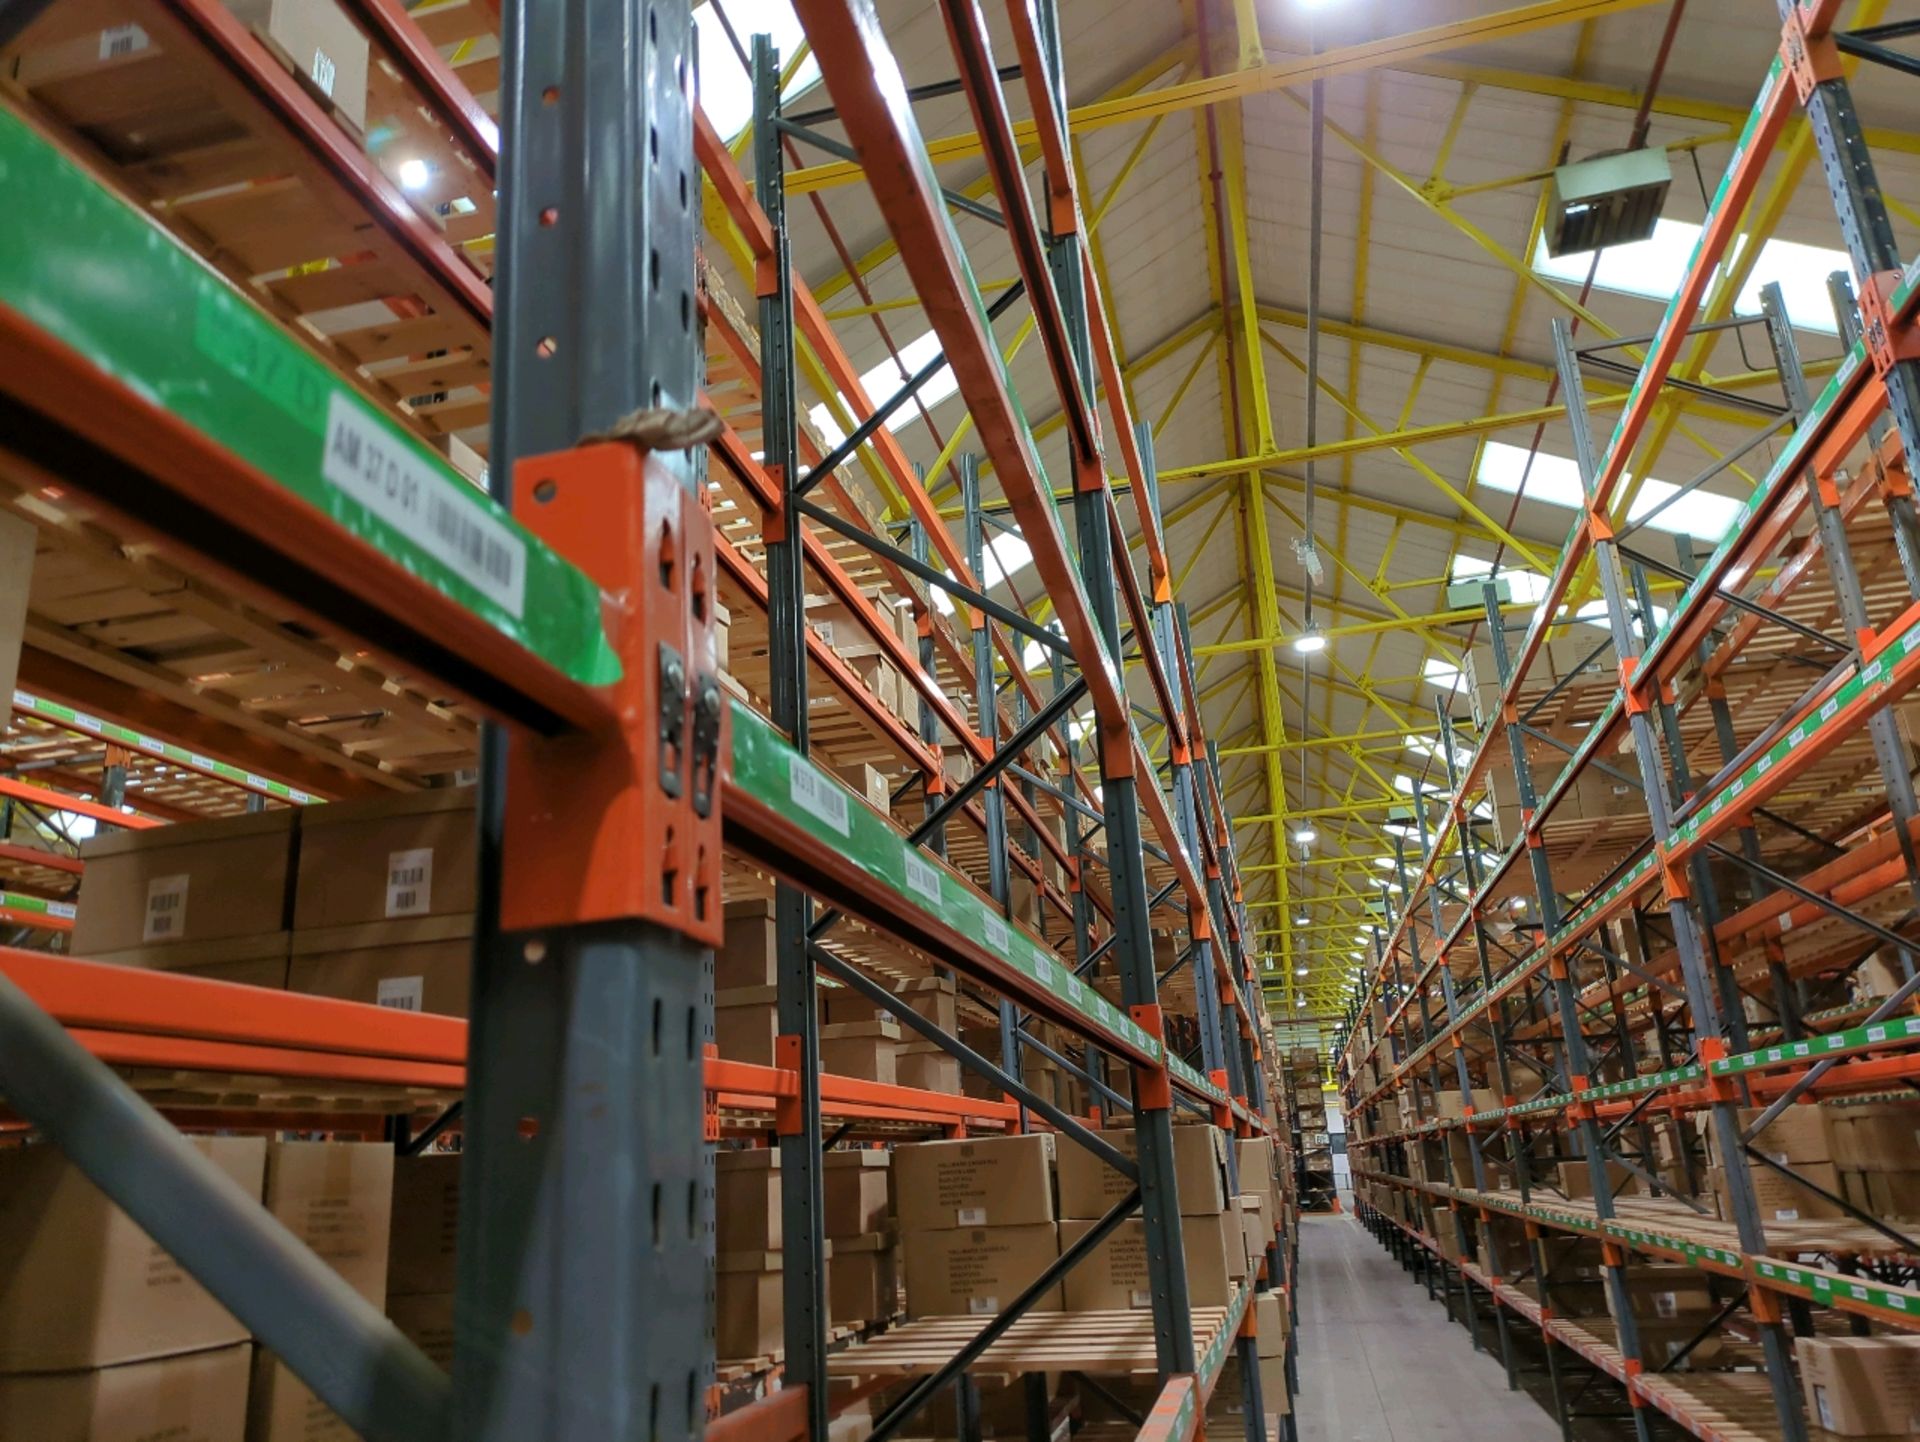 Run Of 44 Bays Of Back To Back Boltless Industrial Pallet Racking - Image 20 of 21